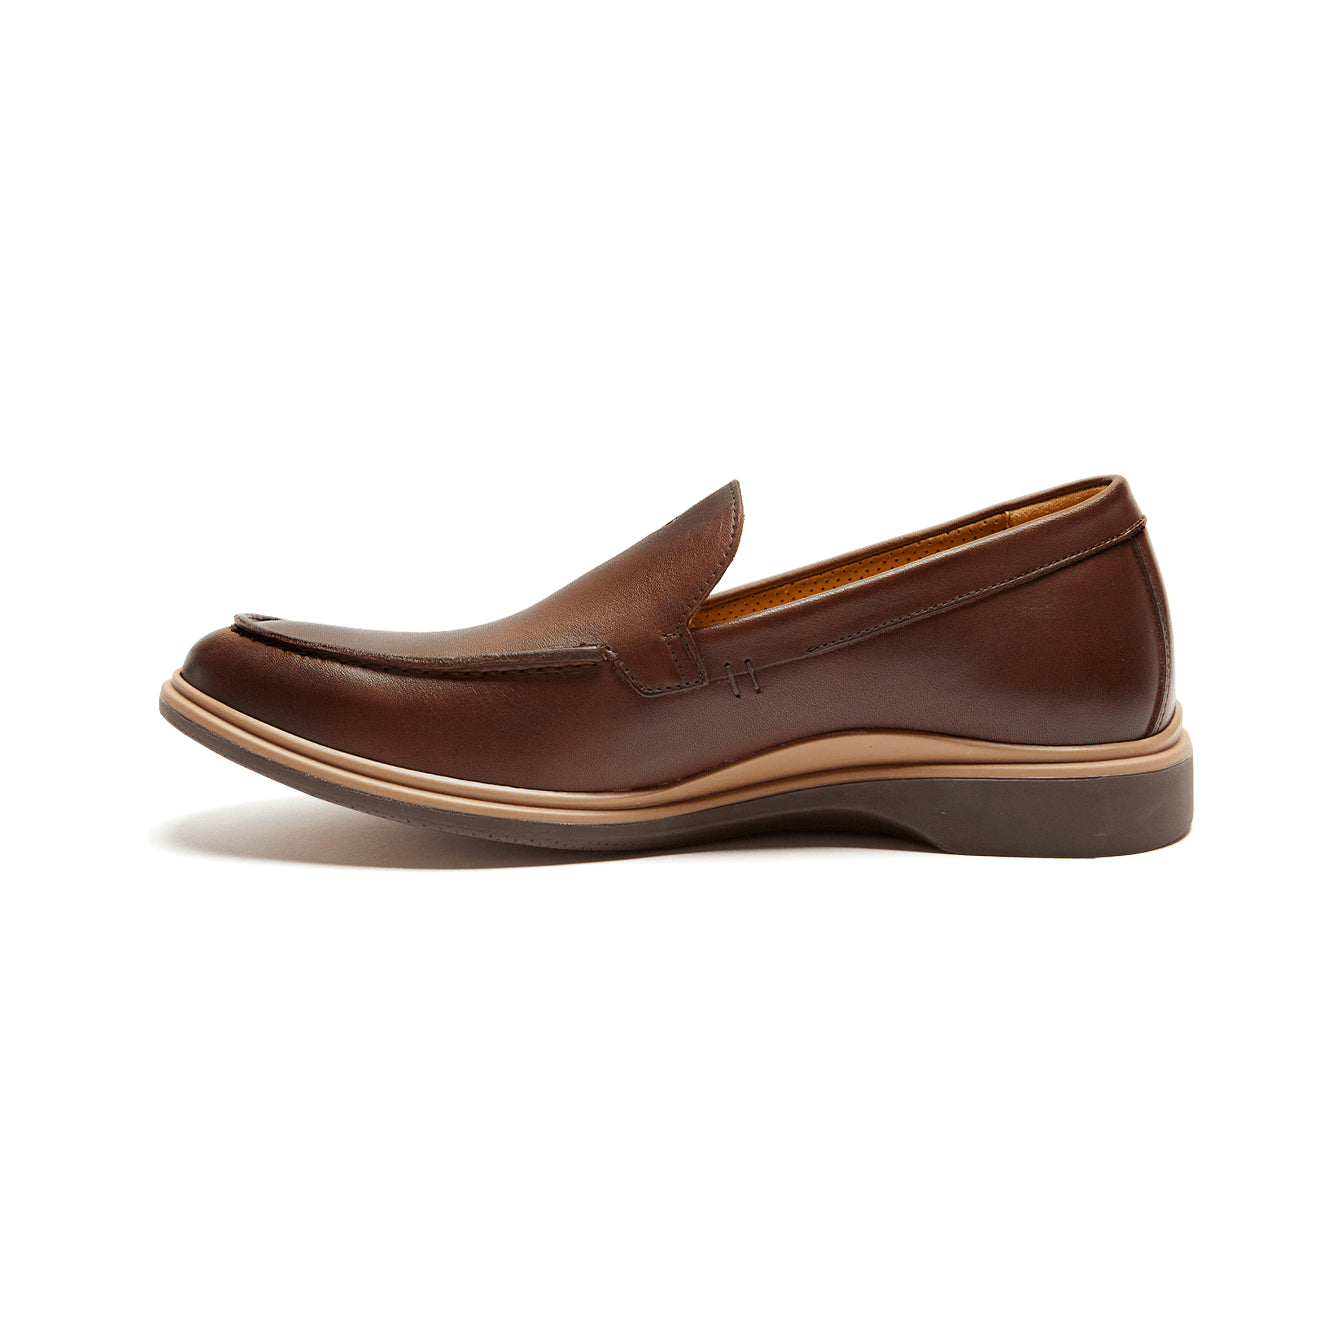 The Loafer Chestnut Brown shoe from Amberjack